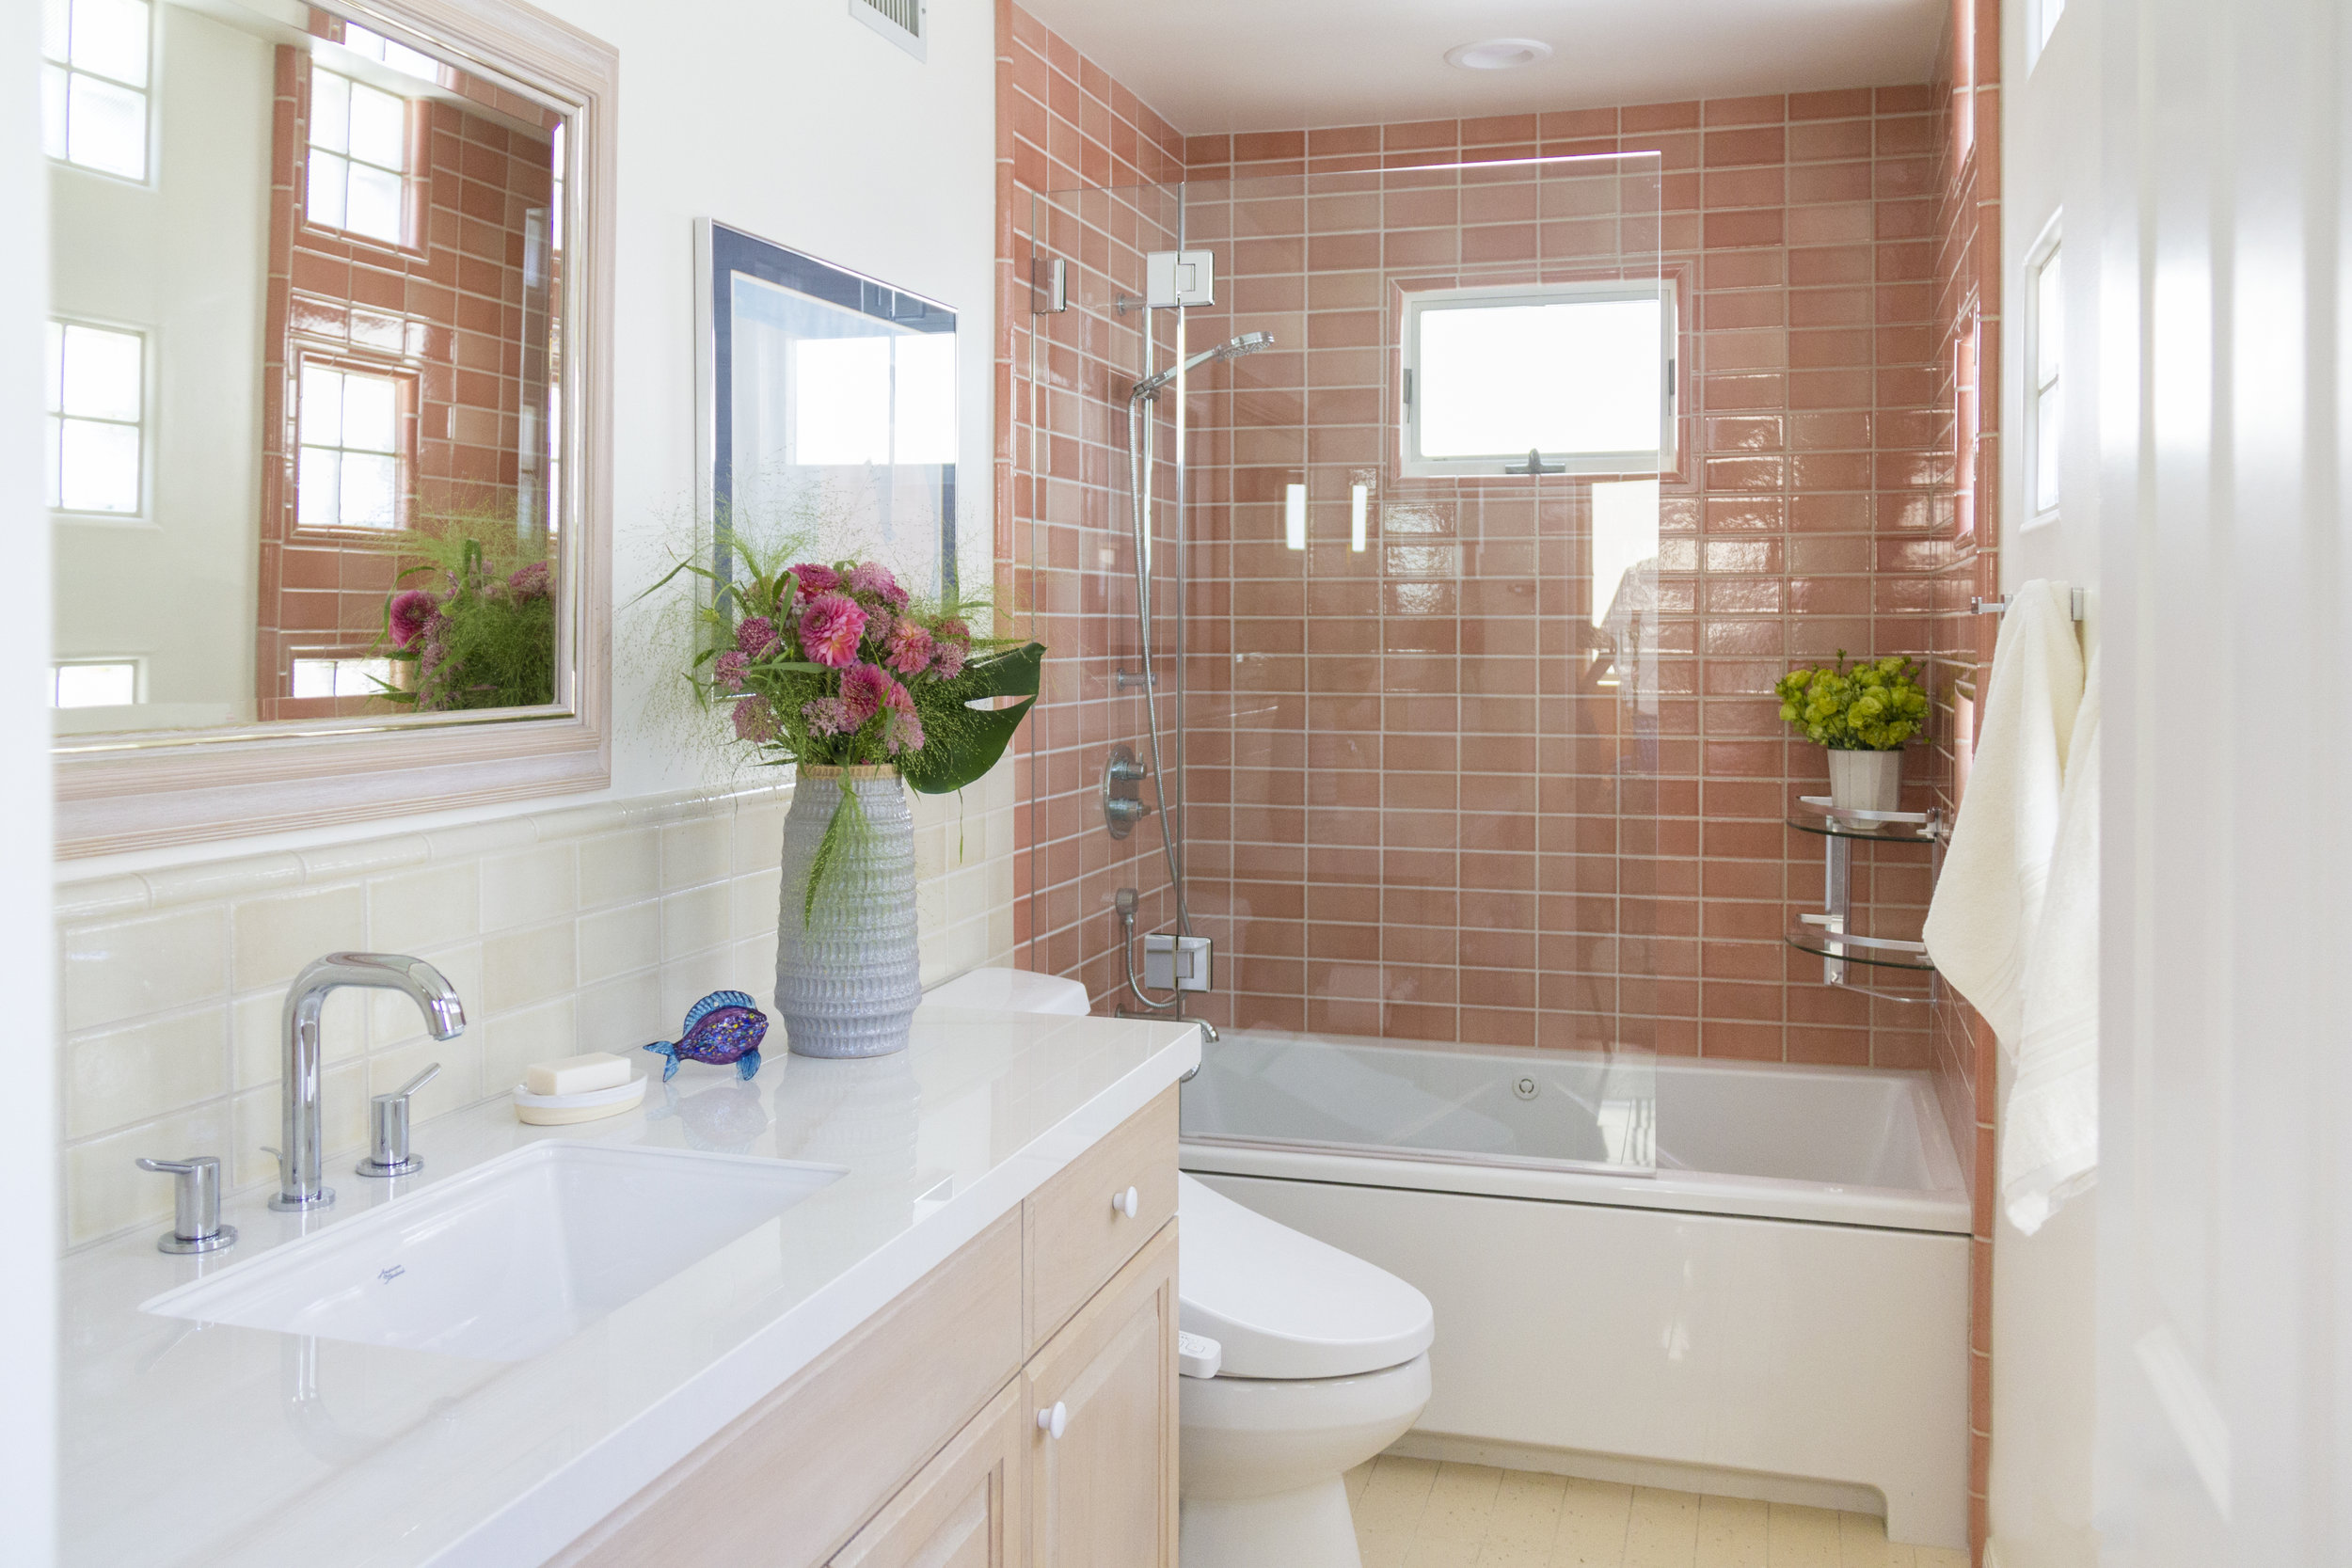 Cheerful coral pink tile pairs beautifully with flowers.